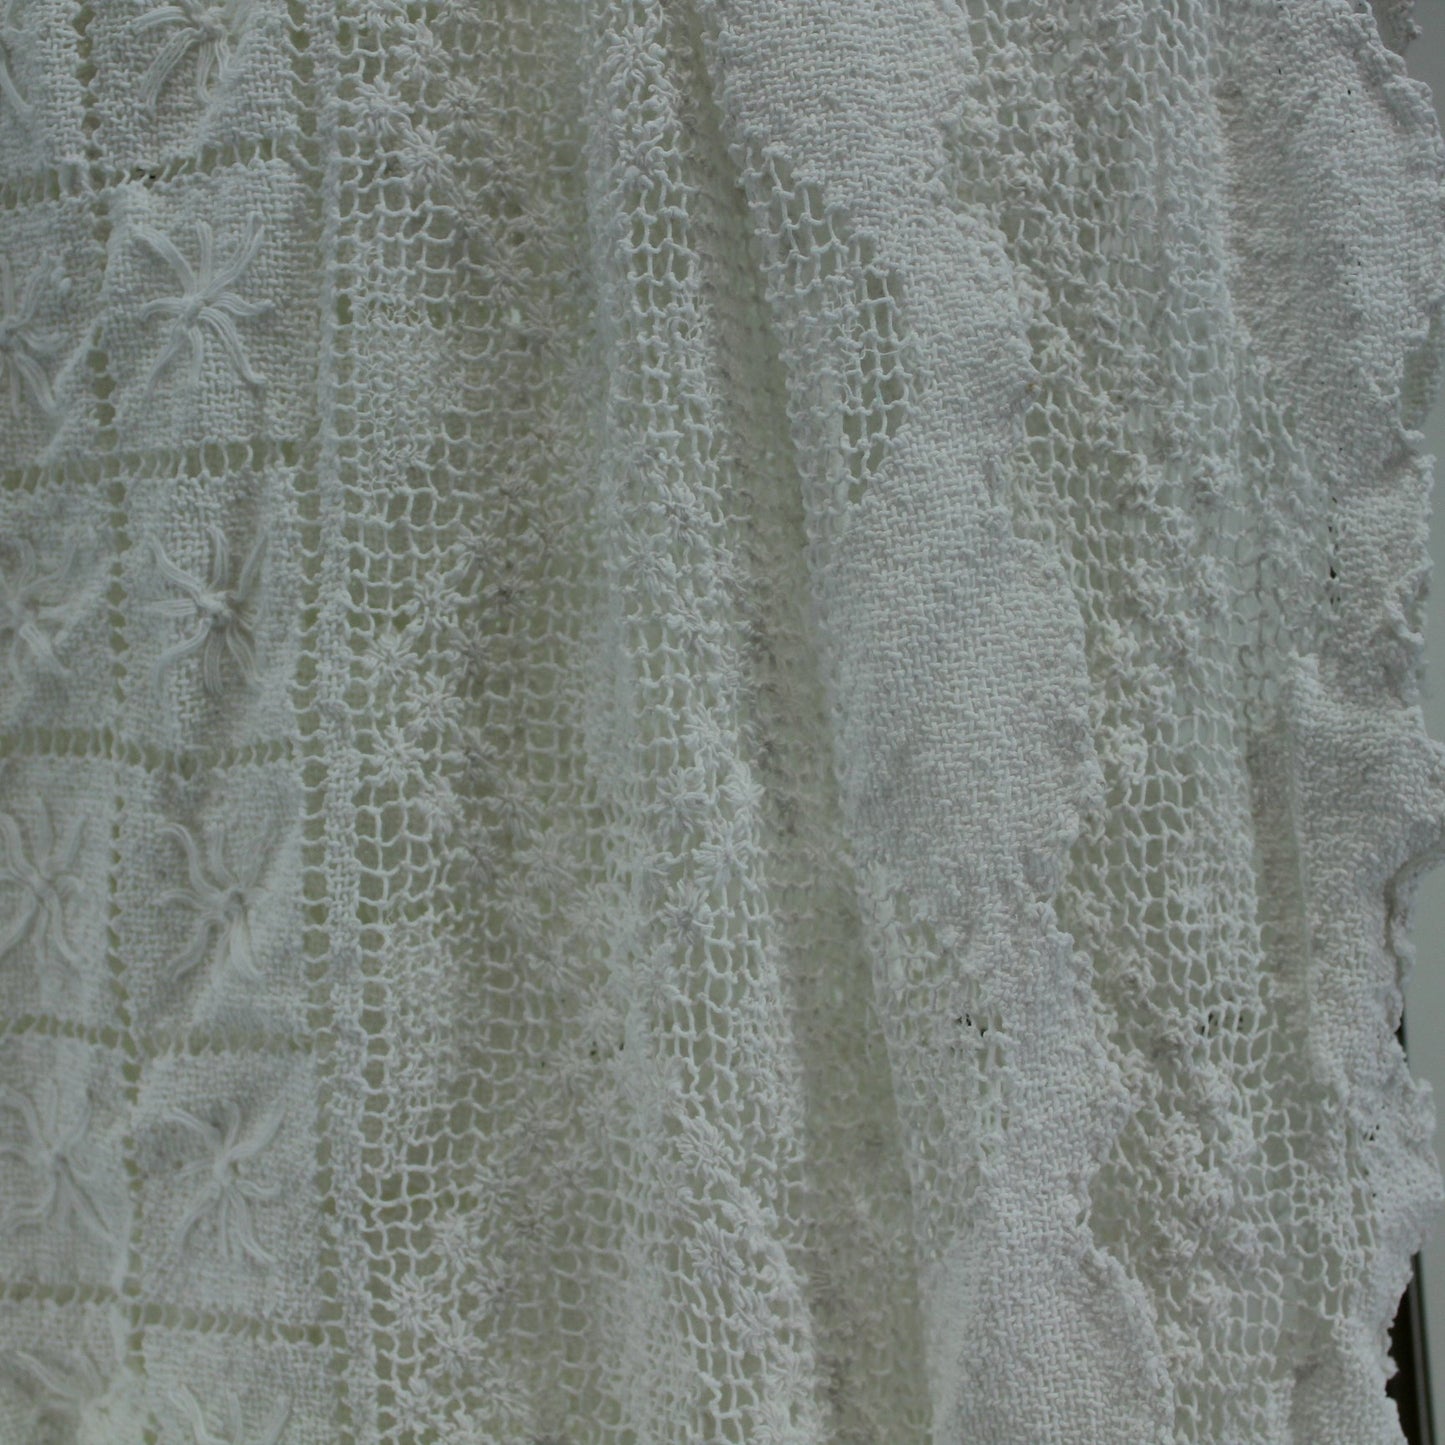 Older 1940s 50s Lace White Table Cloth Elegant Hevy Vraiety Weave 75" X 90" closeup edge